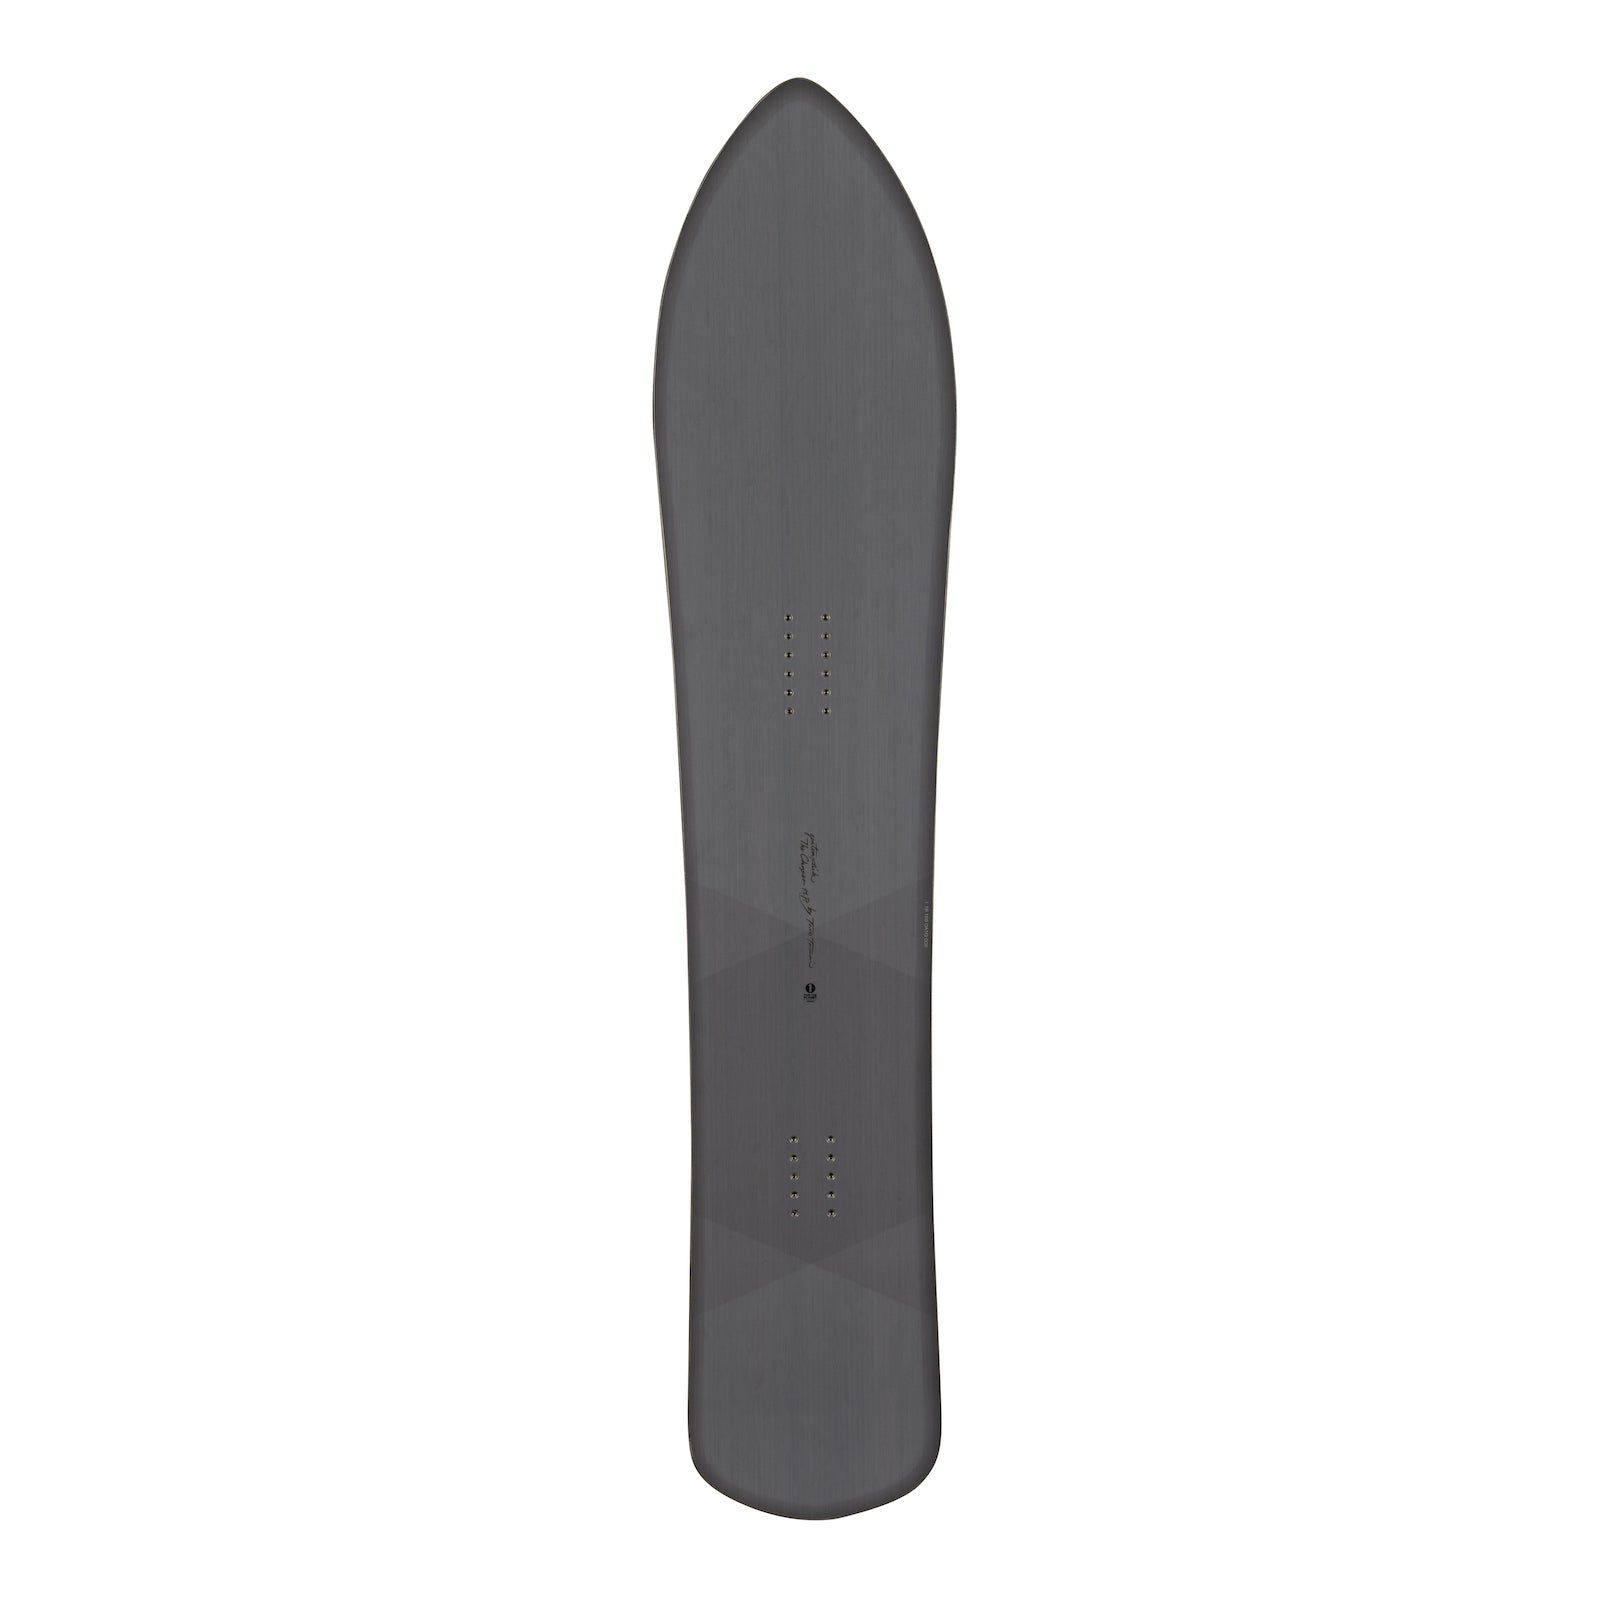 2022 Gentemstick The Chaser HP (High Performance) Snowboard